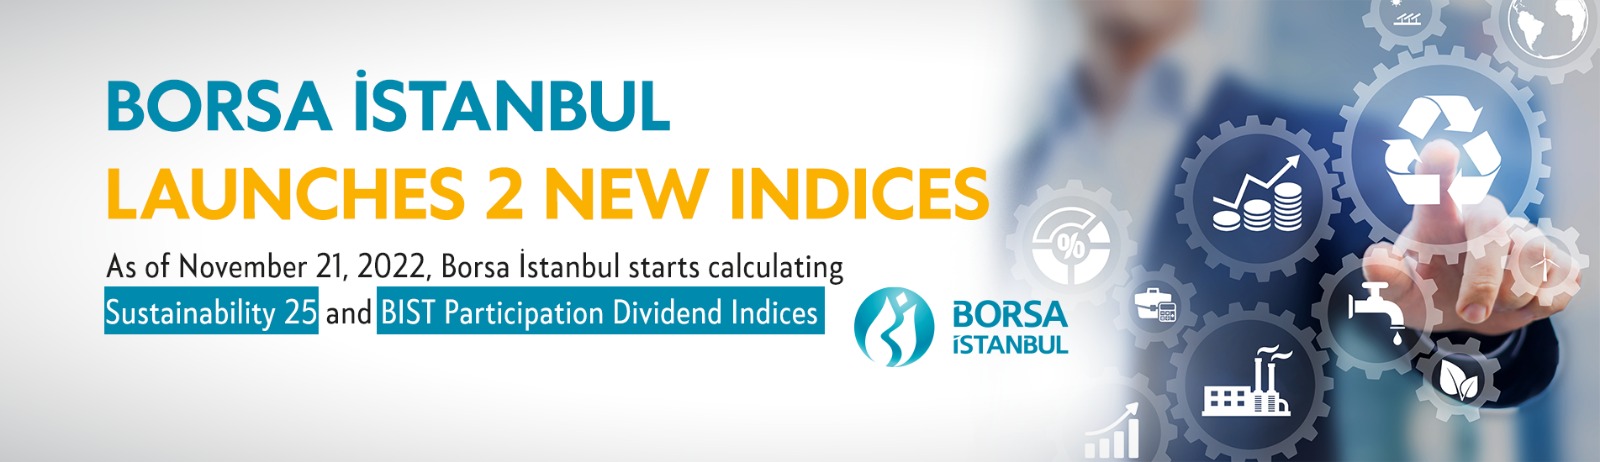 BIST SUSTAINABILITY 25 AND BIST PARTICIPATION DIVIDEND INDICES WILL BE CALCULATED